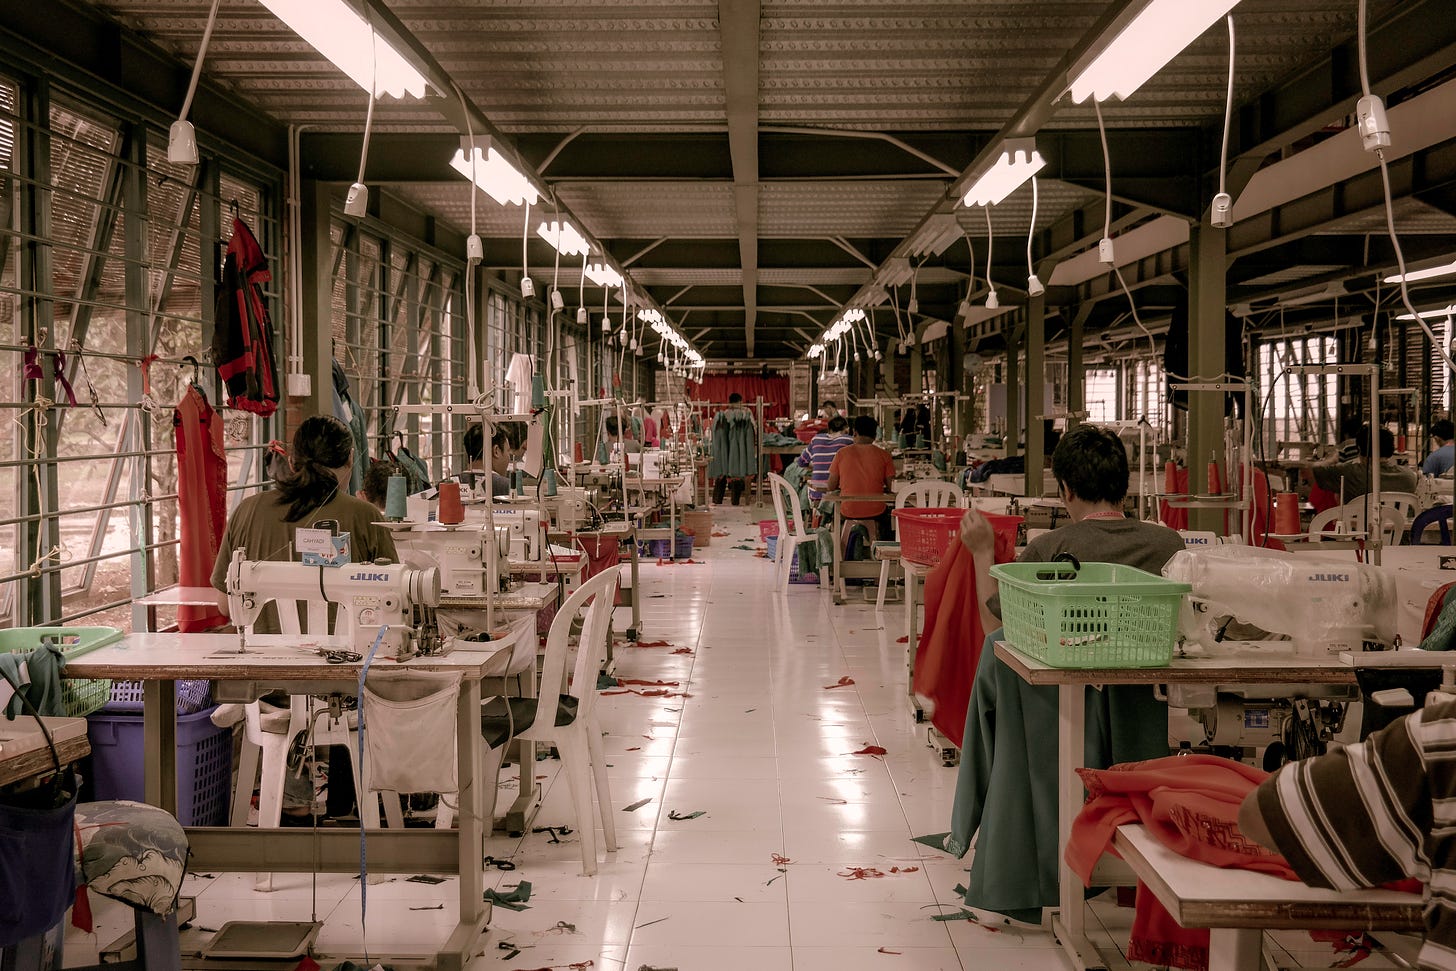 Image taken from the back of a clothing factory with workers sewing garments.